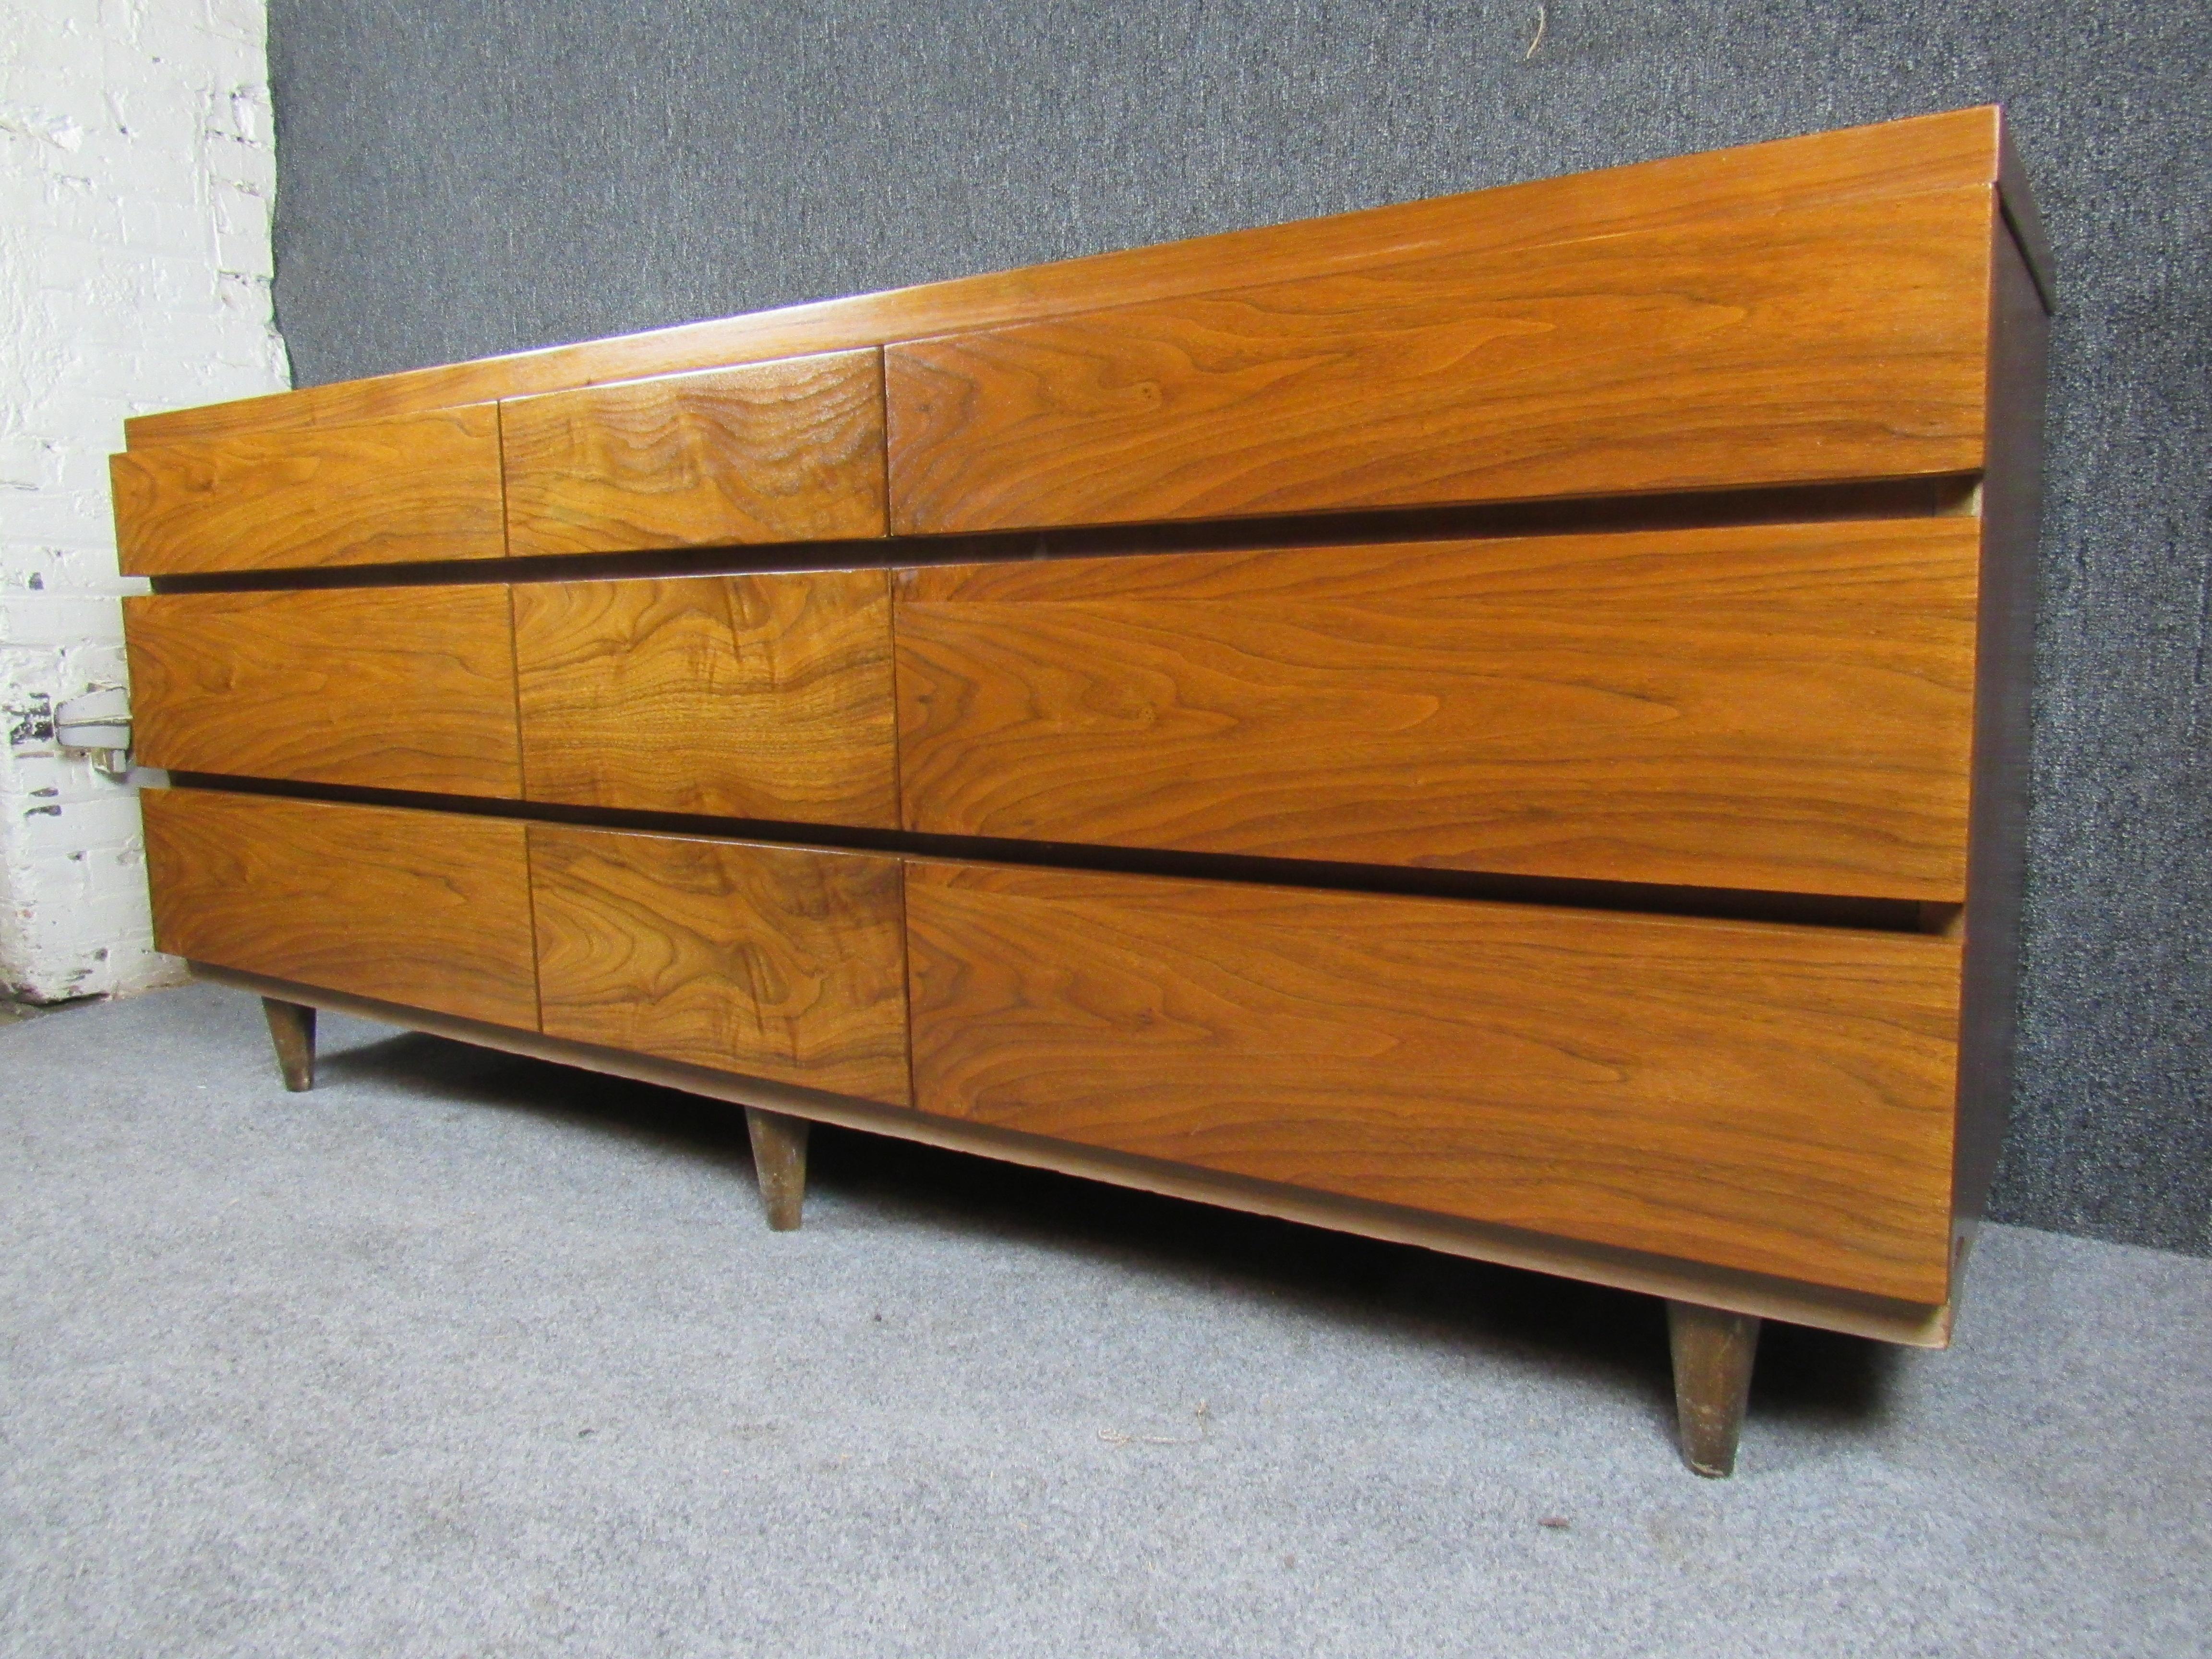 Bring home Classic Mid-Century Modern American minimalism with this gorgeous nine-drawer low dresser from Virginia's Bassett Furniture Industries. Taking aesthetic cues from the timeless designs of Milo Baughman and Merton Gershun, the gorgeous